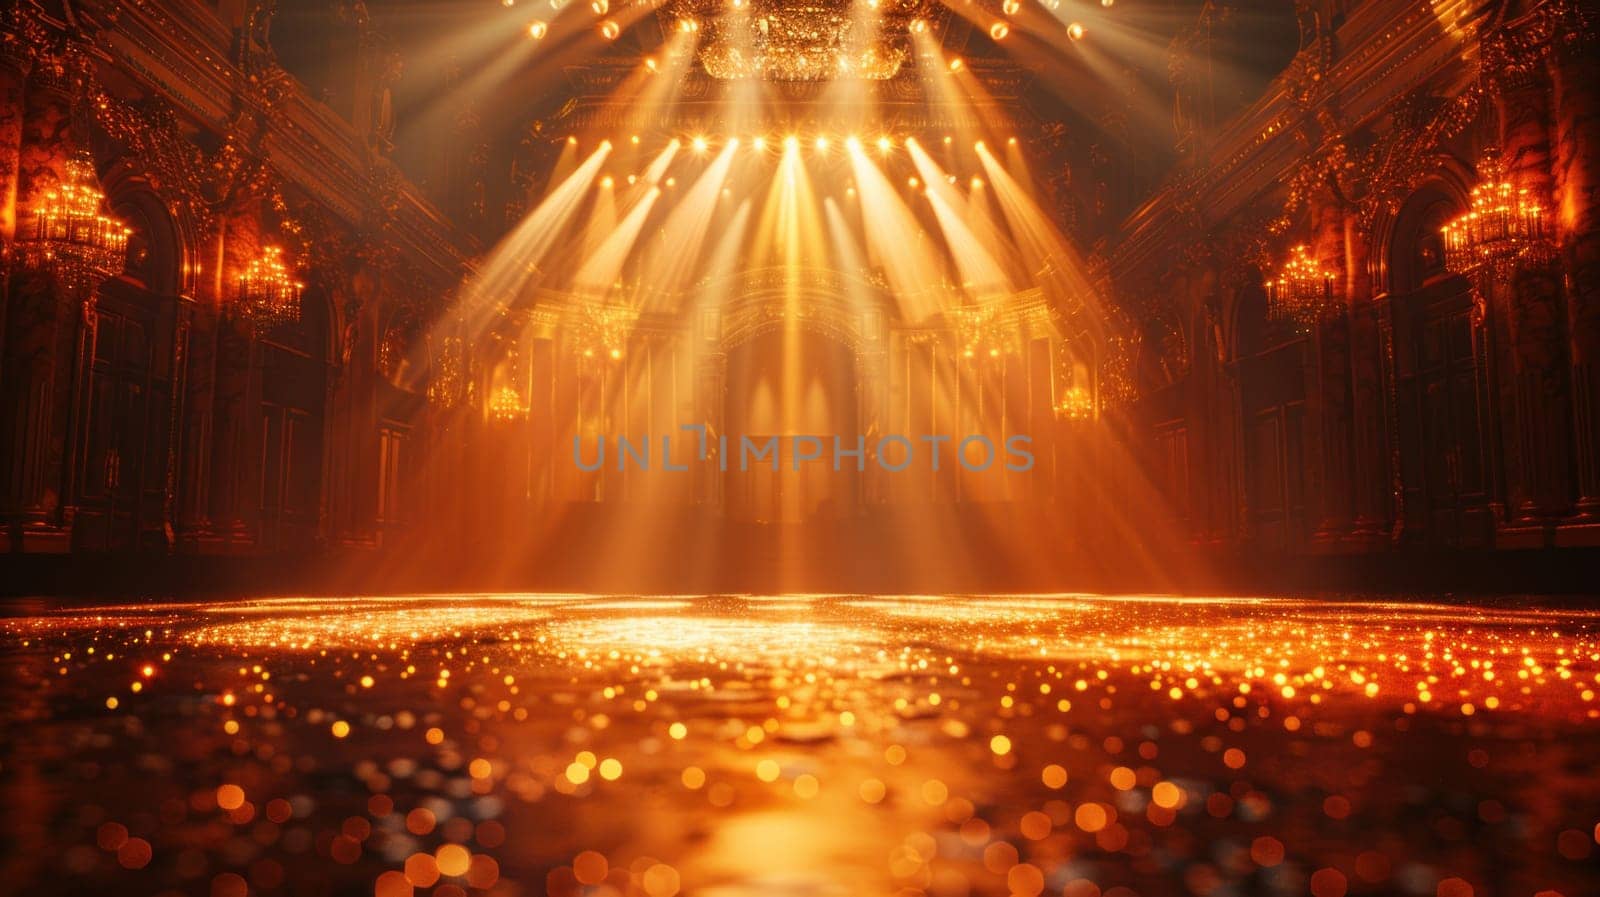 A stage illuminated by bright lights shining down, creating a spotlight effect on the podium.